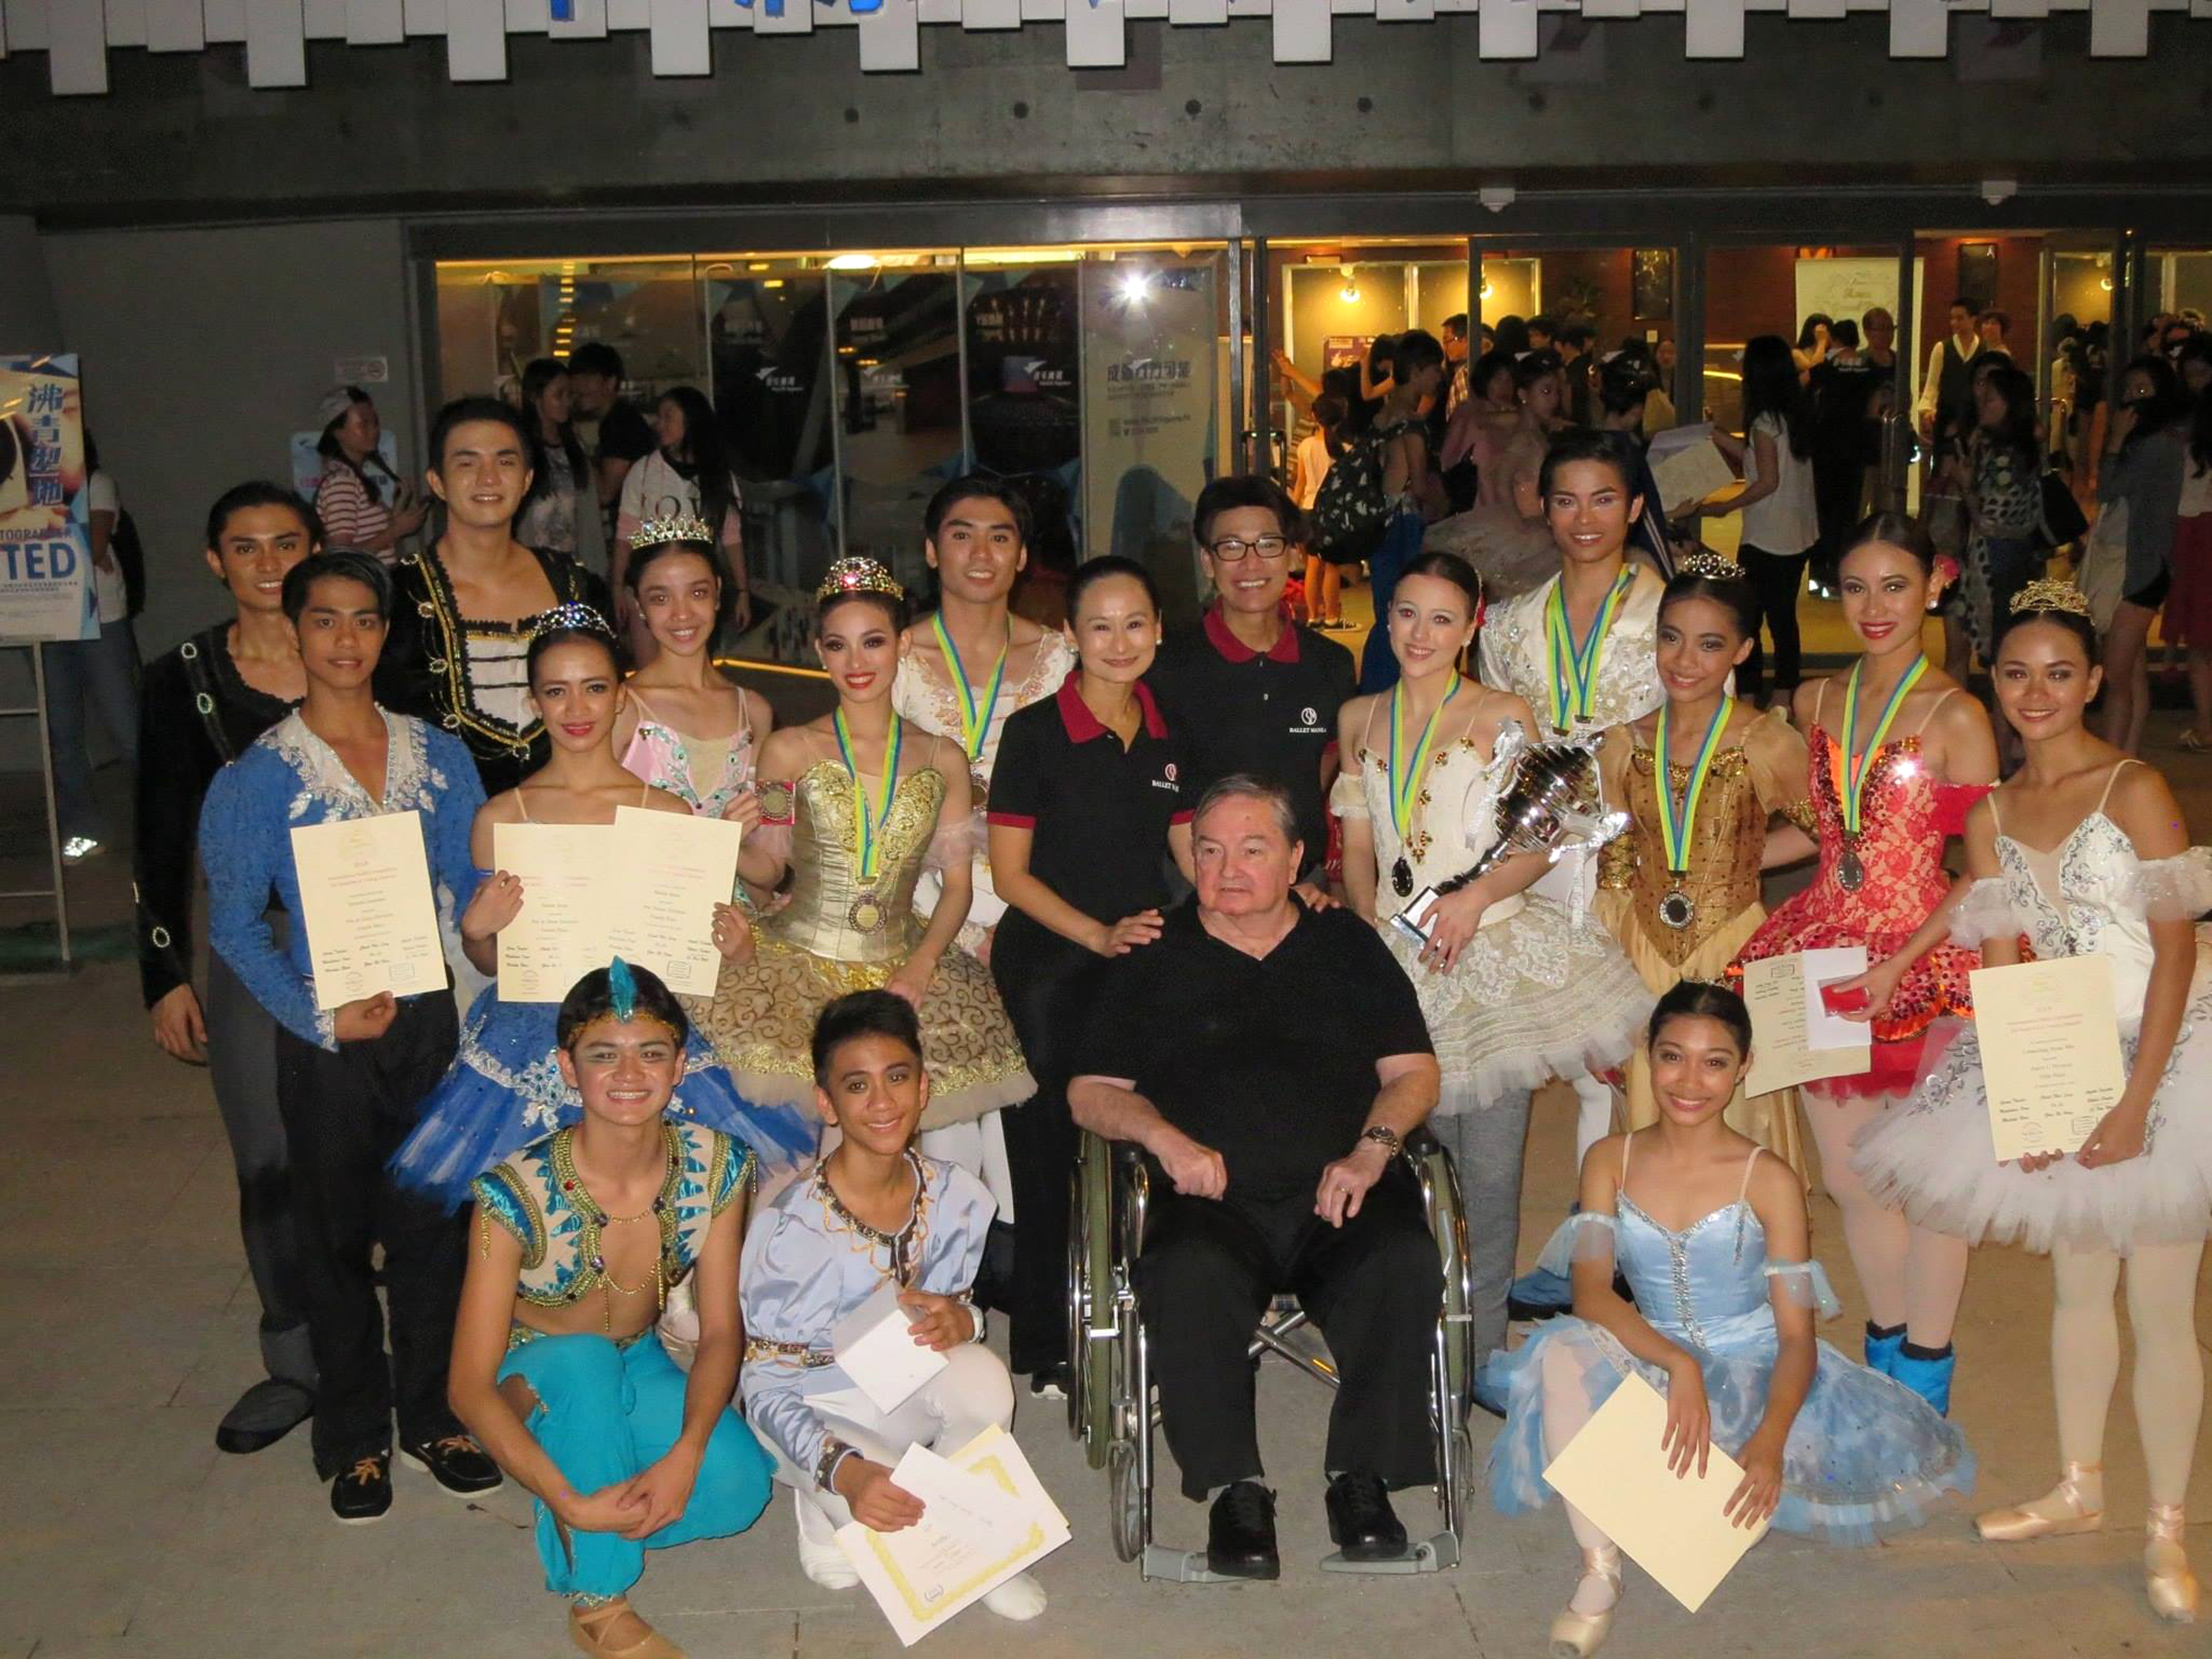  Fred is on hand to congratulate the BM dancers who won medals and citations at the Asian Grand Prix in Hong Kong in 2015. Standing to his left is principal artist Katherine Barkman who bagged the competition’s top prize. 